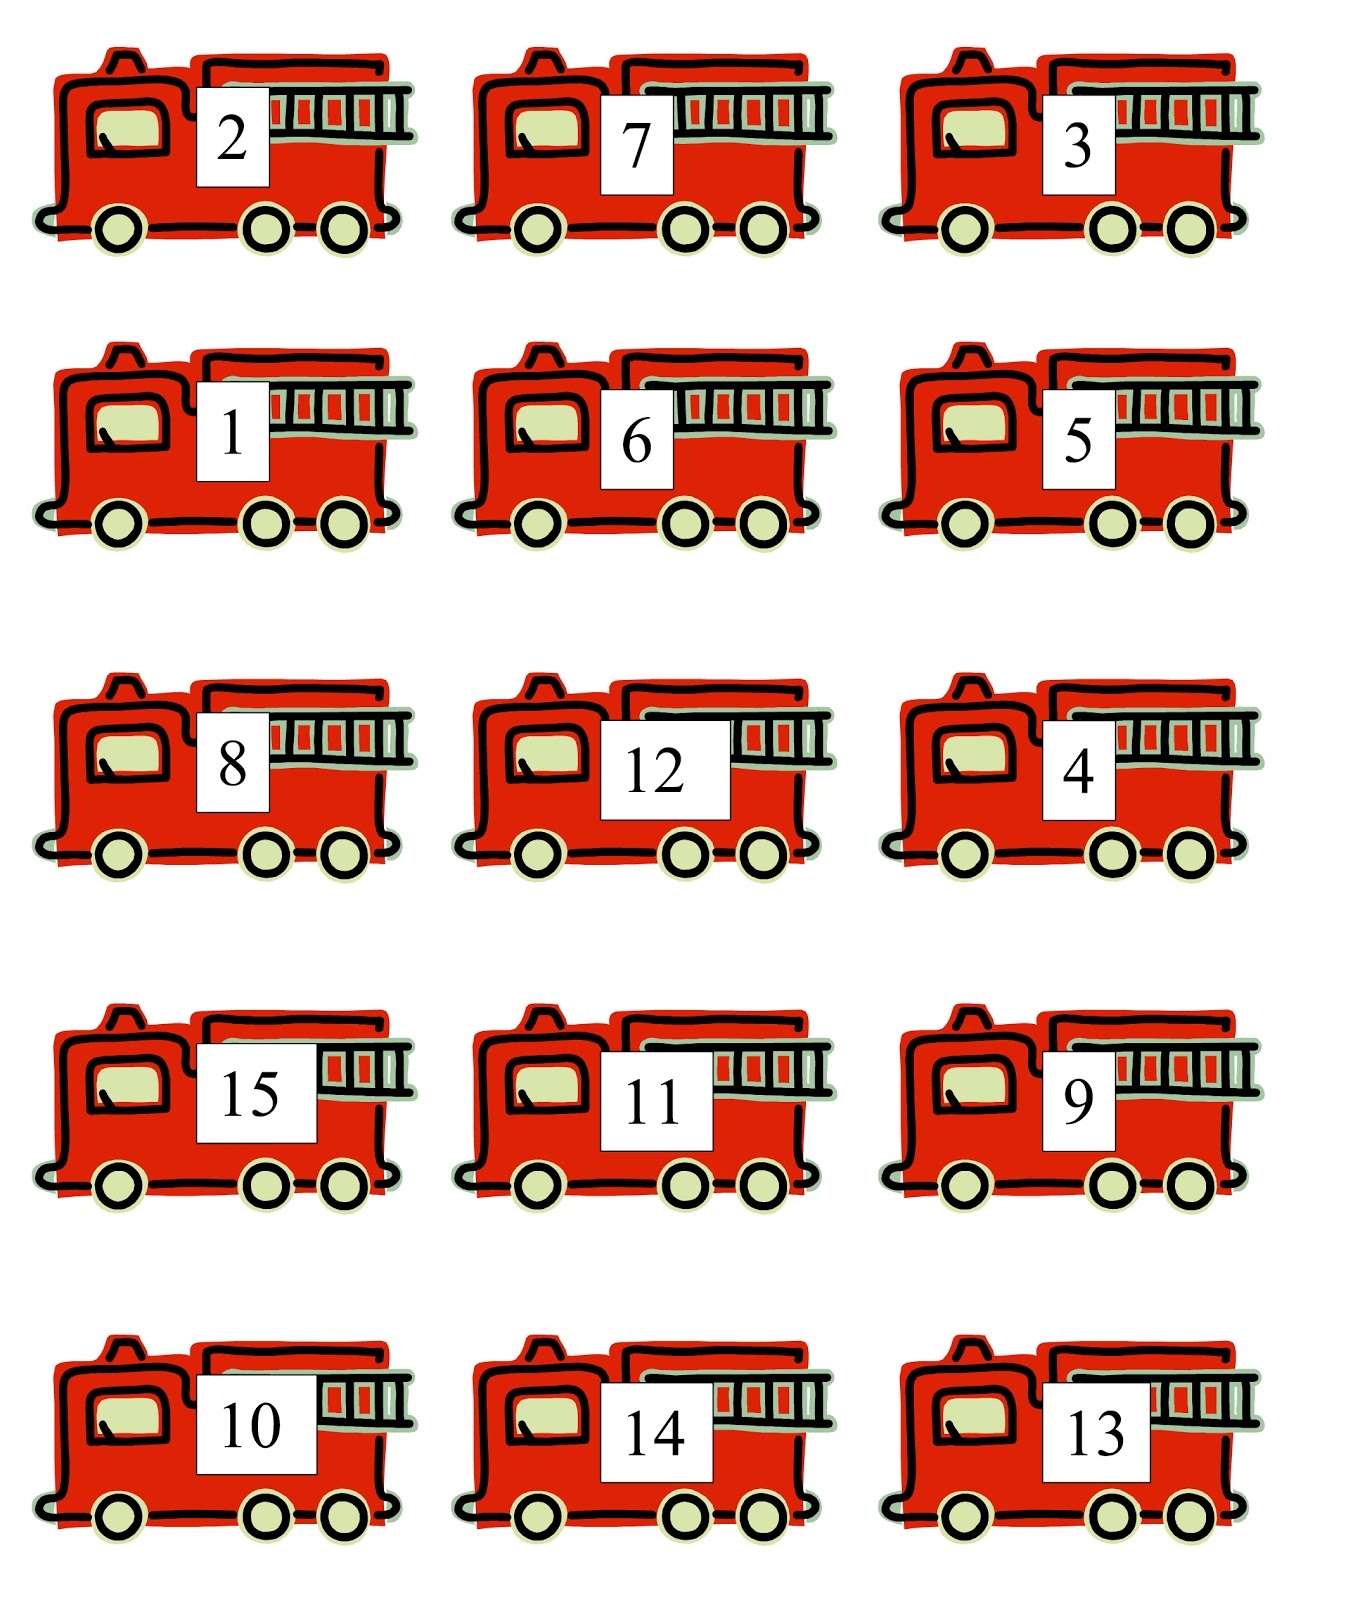 fire+truck+length+and+number+order-2.jpg